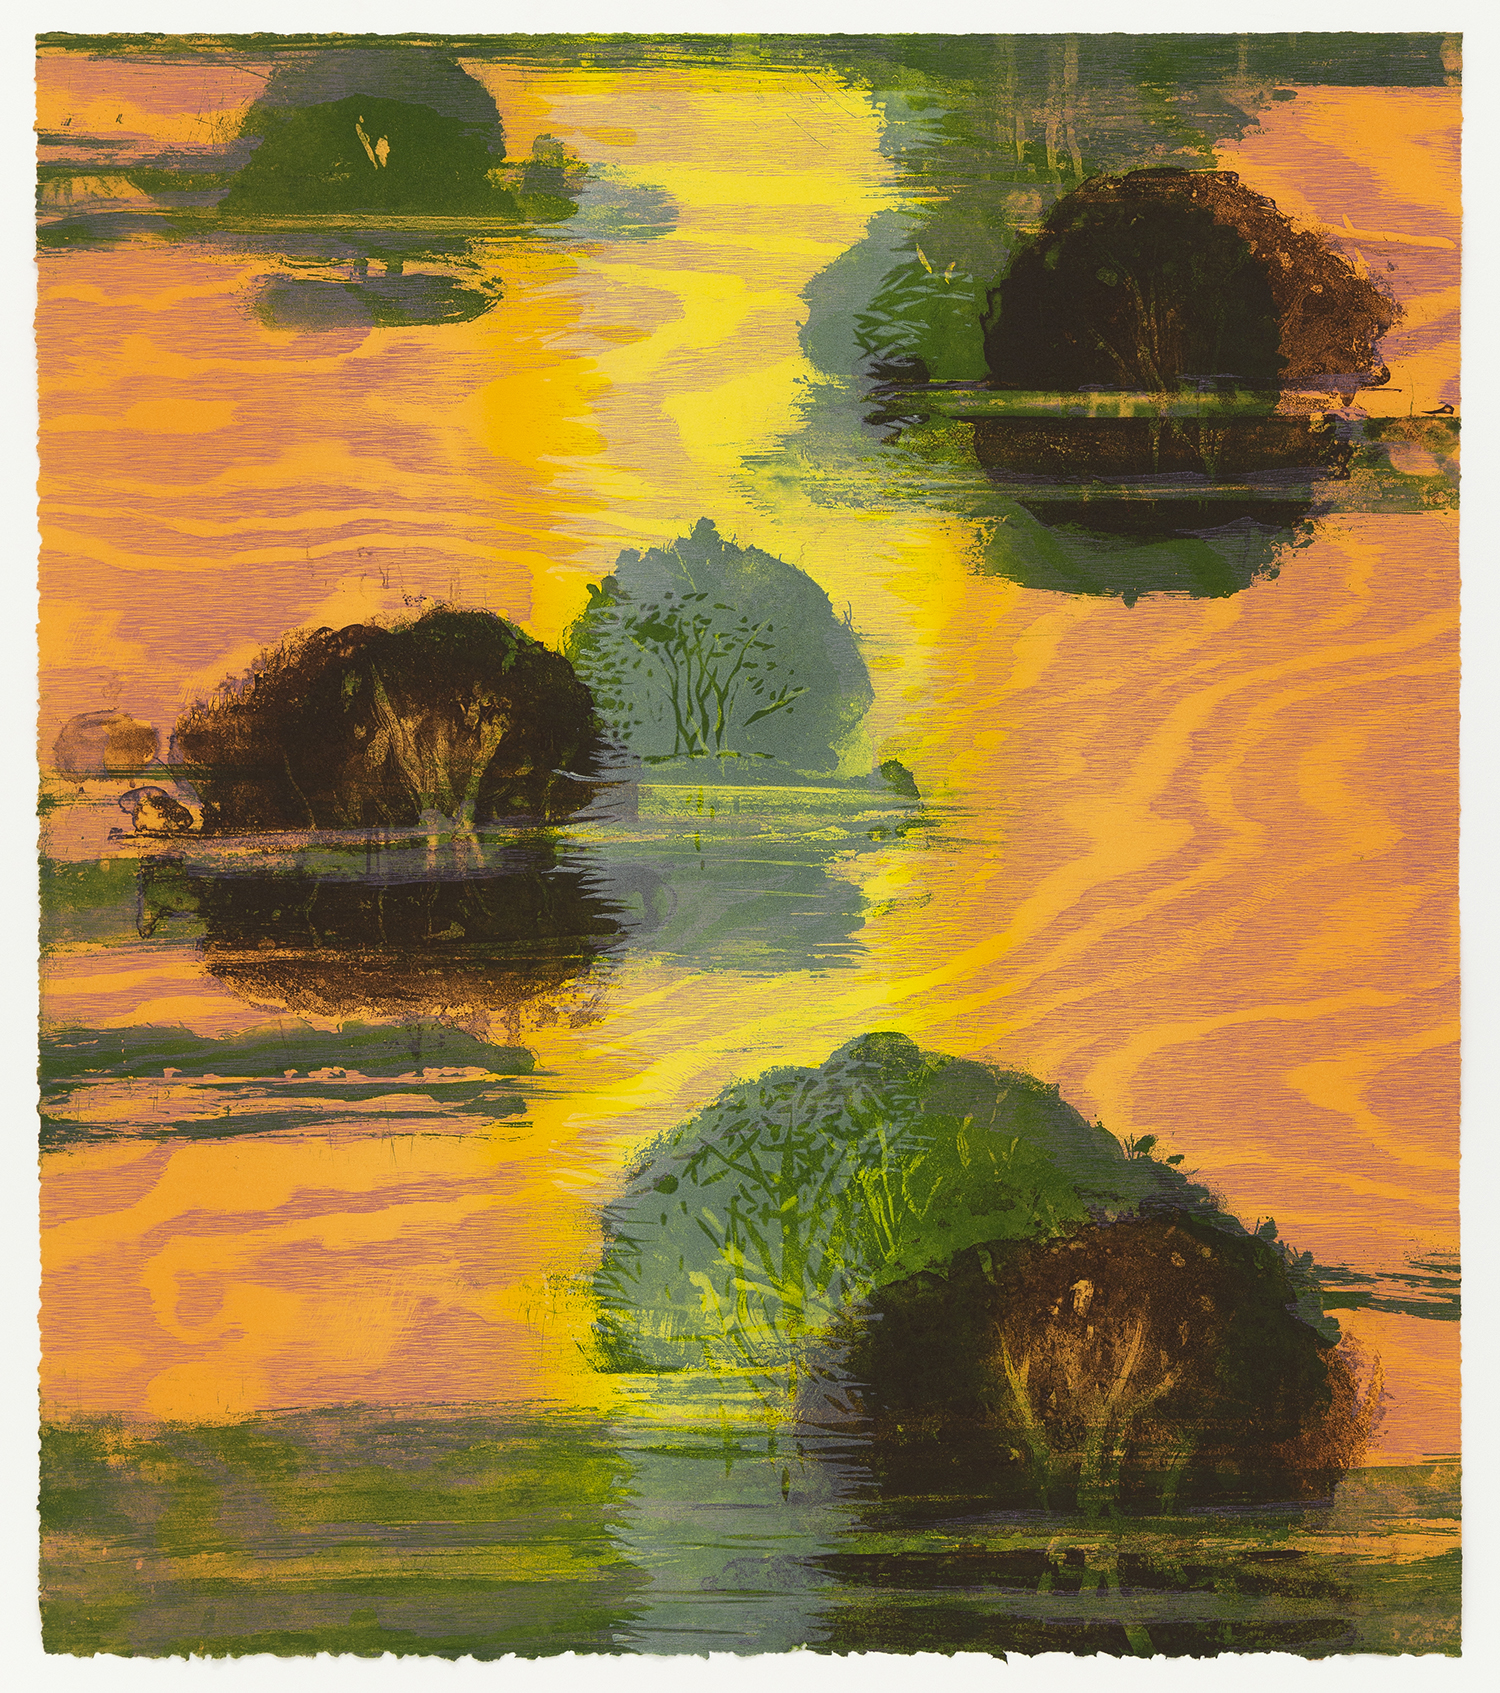 Gail's Island 2, 2008, Etching, aquatint and woodcut, 28 3/8 x 25 inches (72.1 x 63.5 cm), Edition of 25